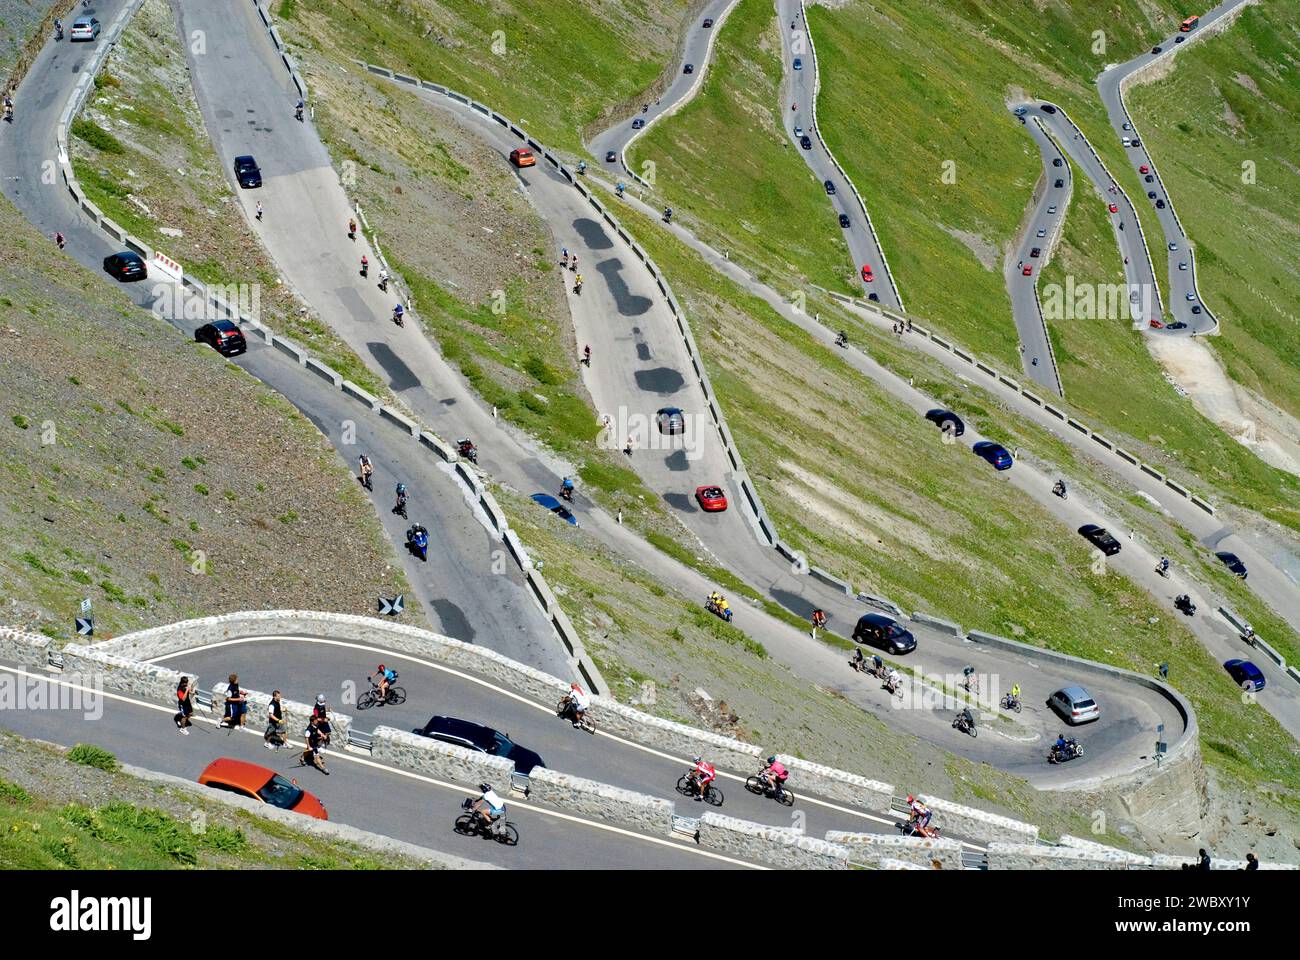 much traffic on Stelvio Pass in the summer season, busy and crowded with pedestrians, bikers, cars, traffic jam , South Tyrole, Alps Stock Photo